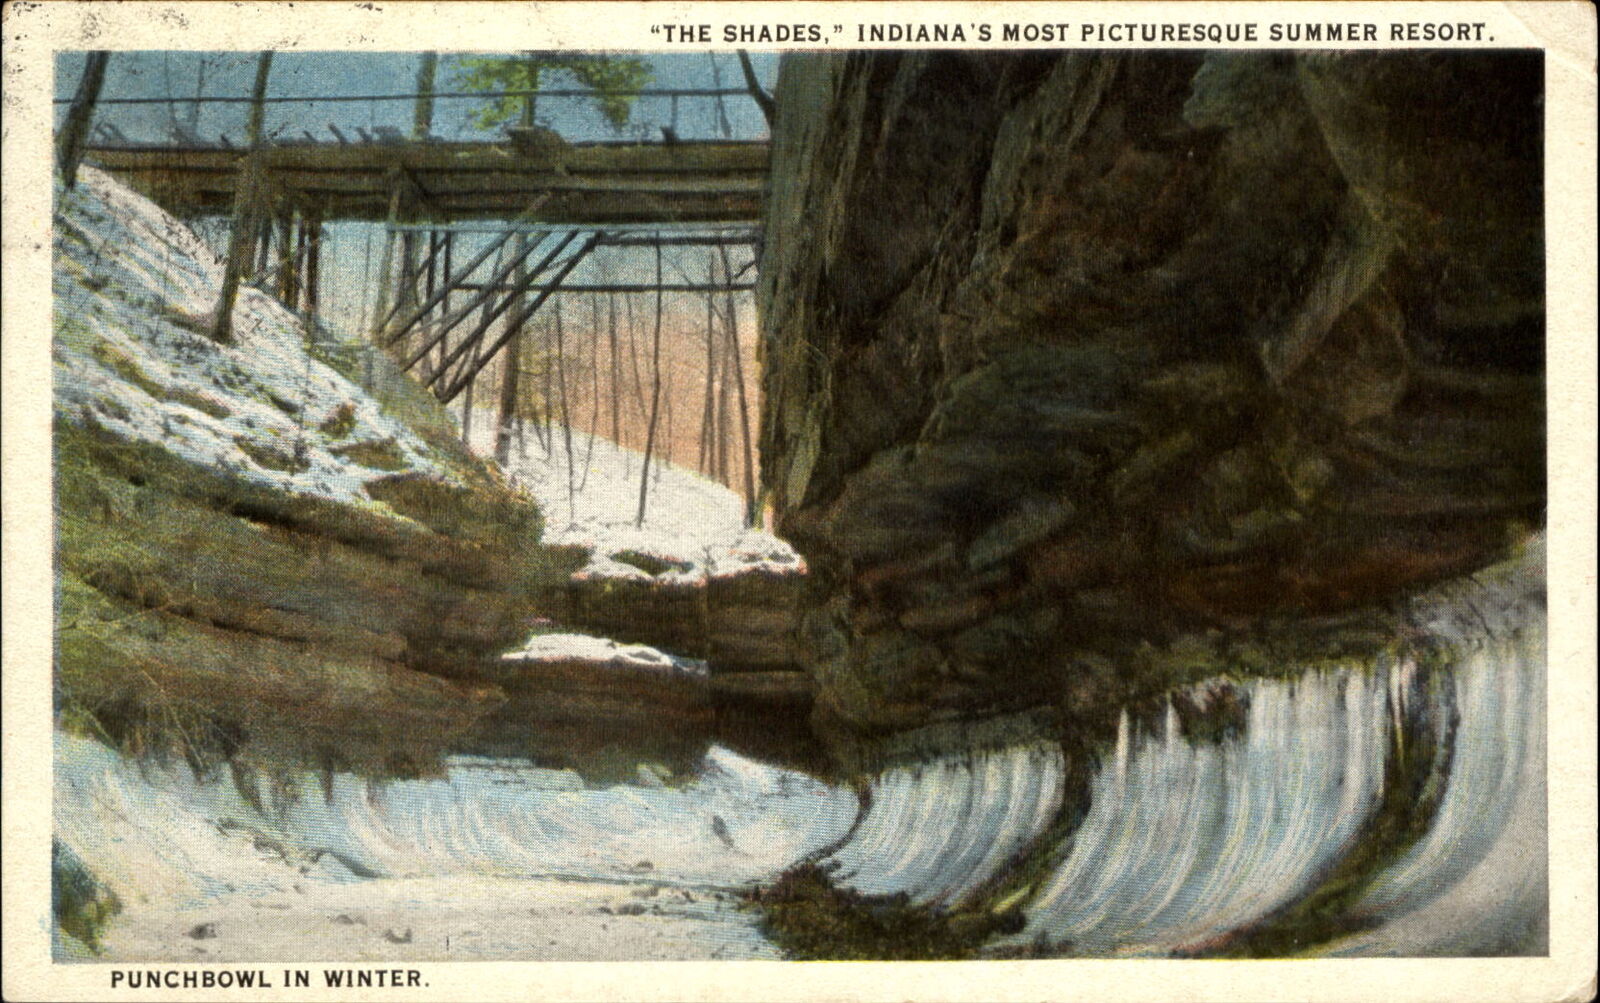 Punchbowl in Winter ~ The Shades summer resort Indiana IN ~ 1920s